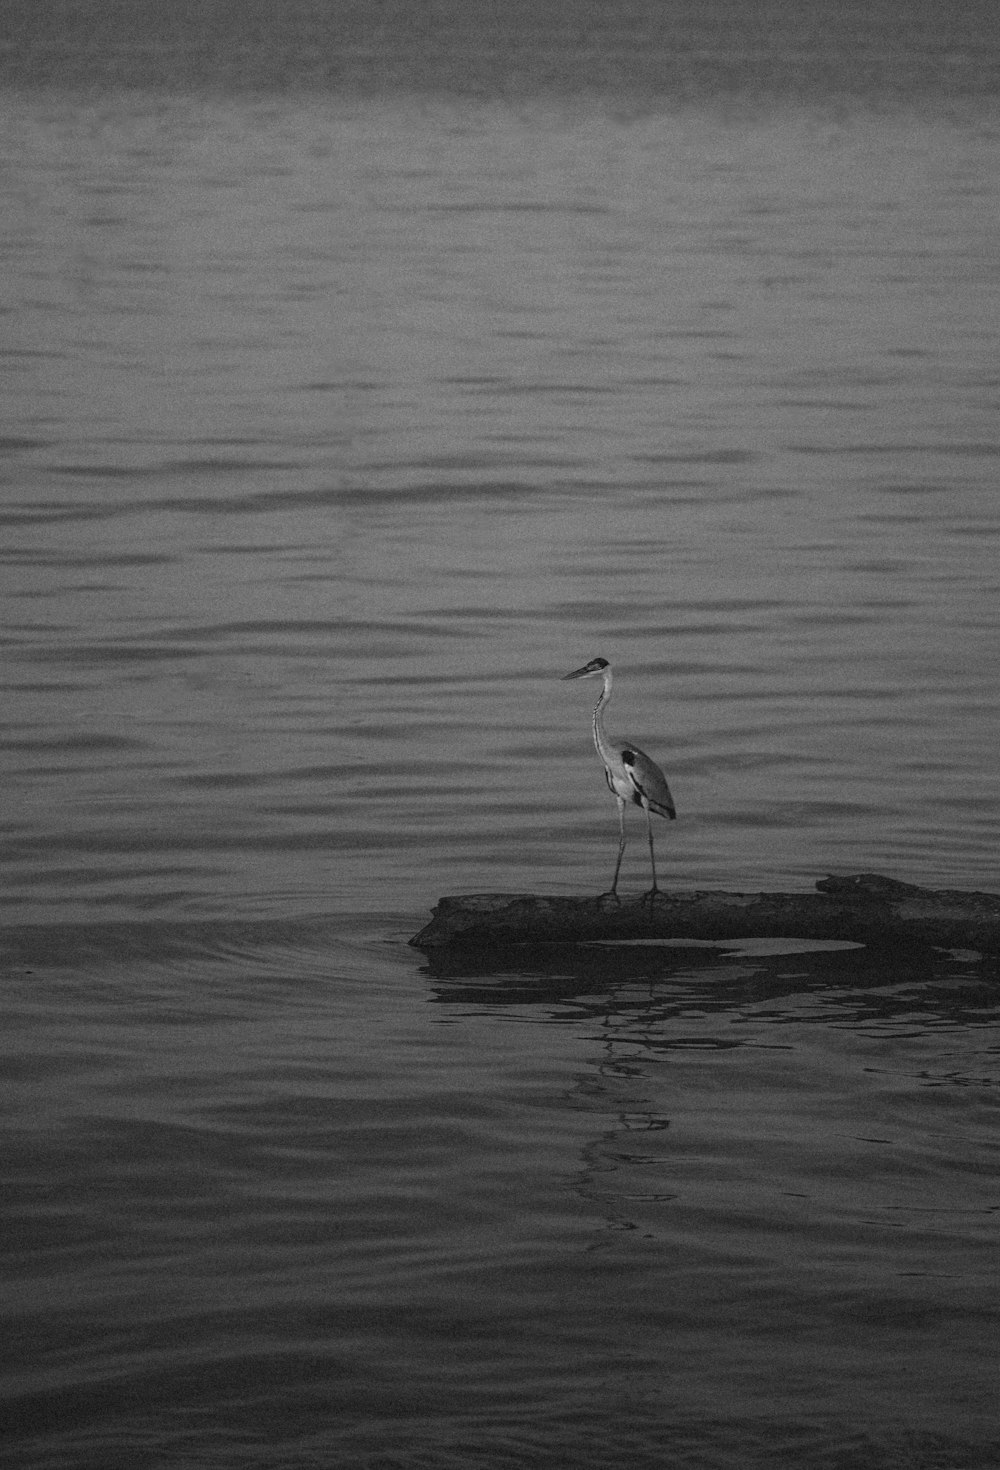 a bird is standing on a log in the water